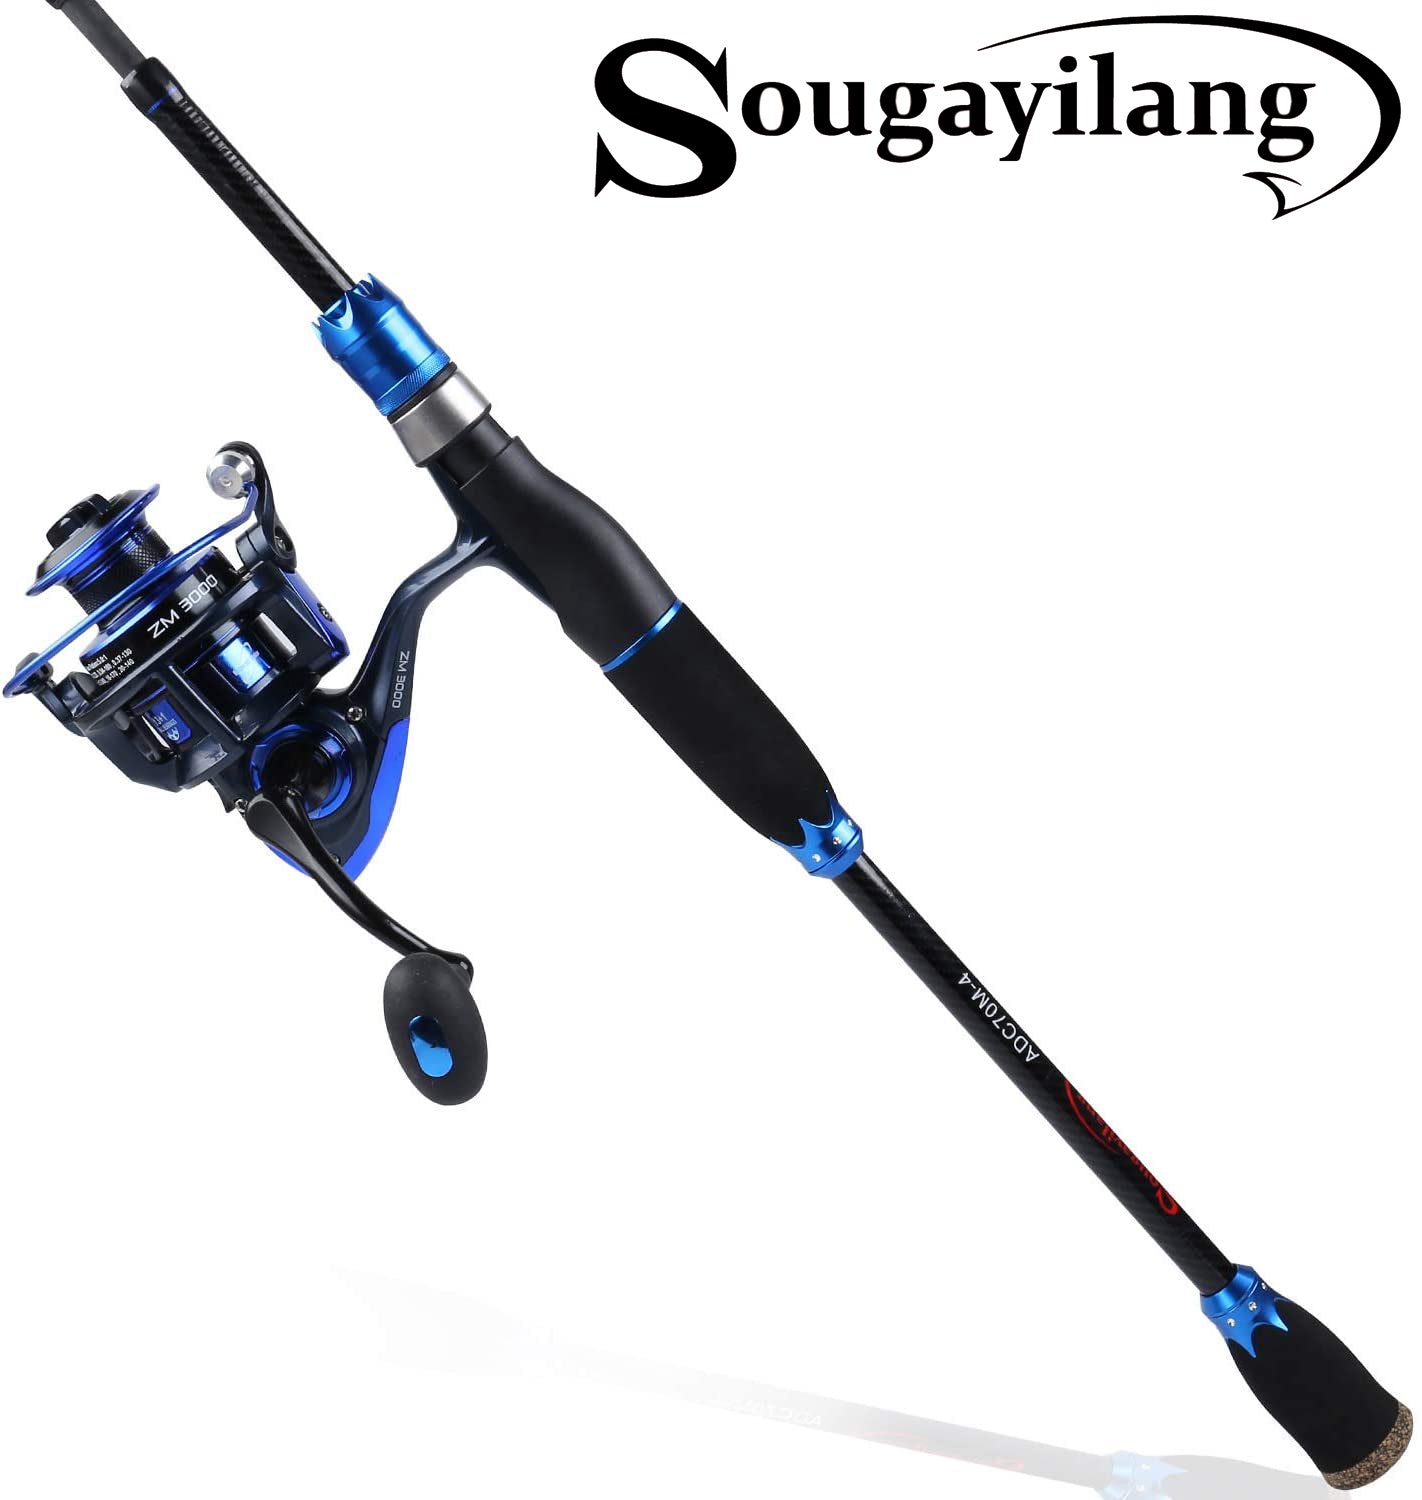 Sougayilang Spinning Fishing Rod Reel Combos,24-Ton Carbon Fiber Protable  Fishing Poles with Spinning Reel for Travel Freshwater Fishing